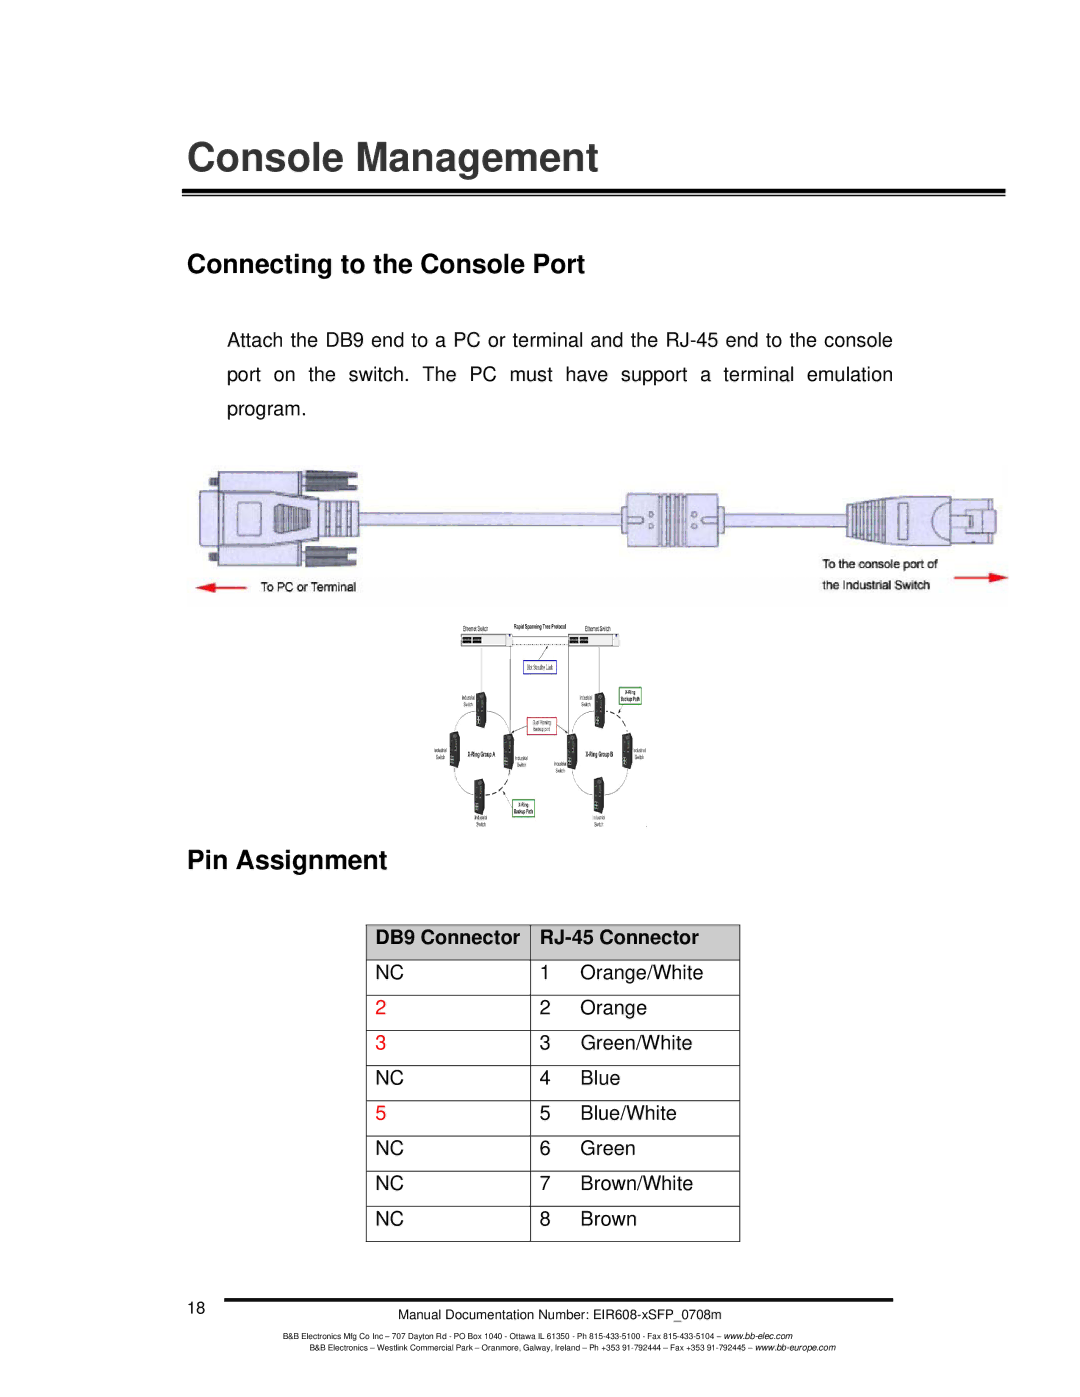 B&B Electronics EIR608-xSFP manual Connecting to the Console Port, Pin Assignment, DB9 Connector RJ-45 Connector 